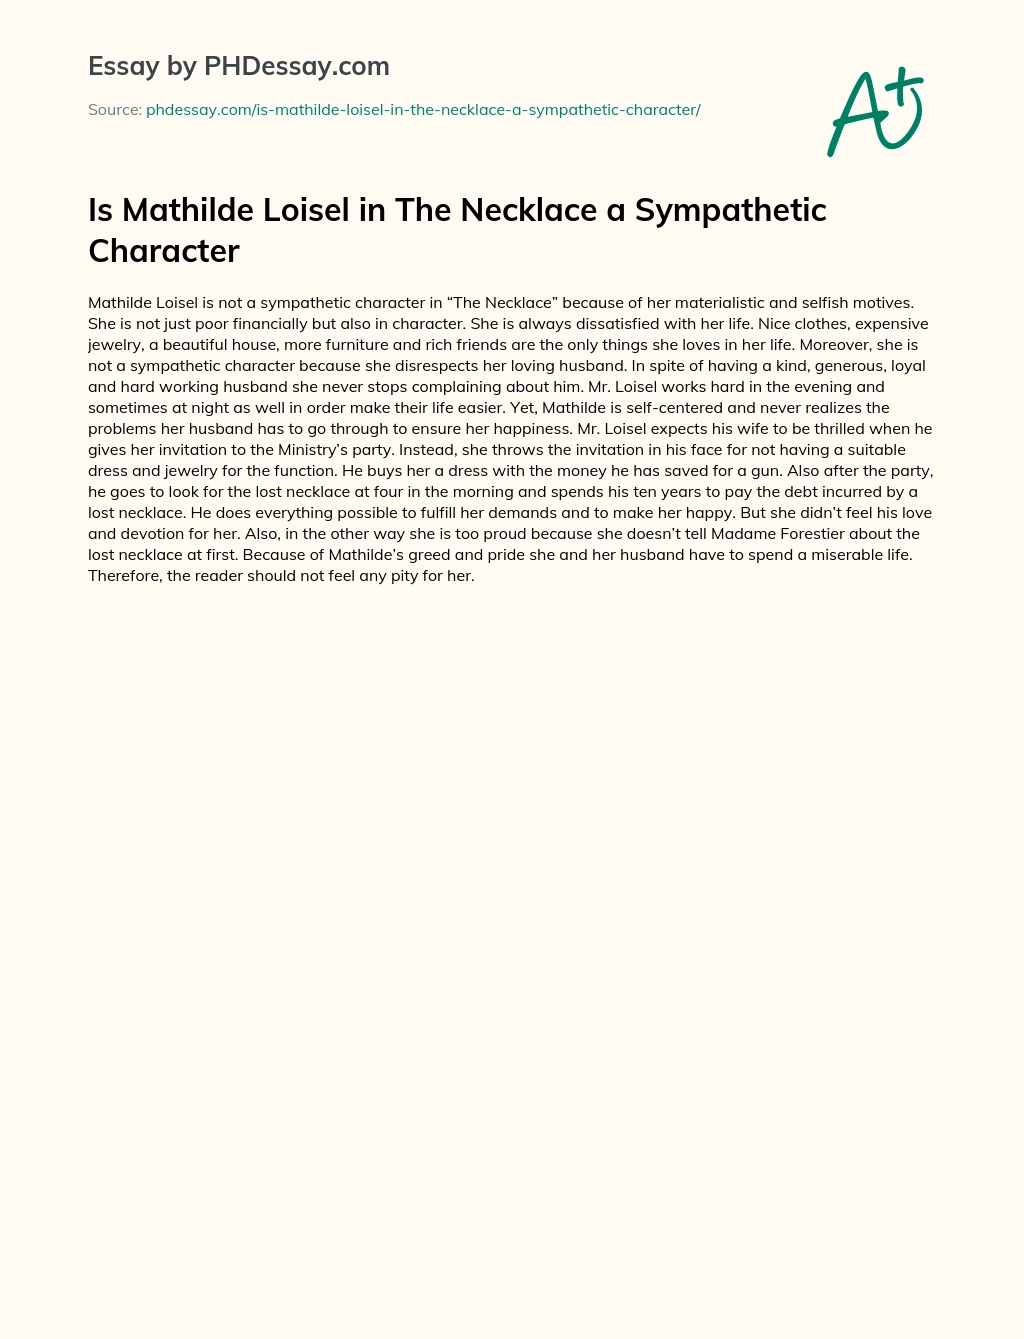 Is Mathilde Loisel in The Necklace a Sympathetic Character essay